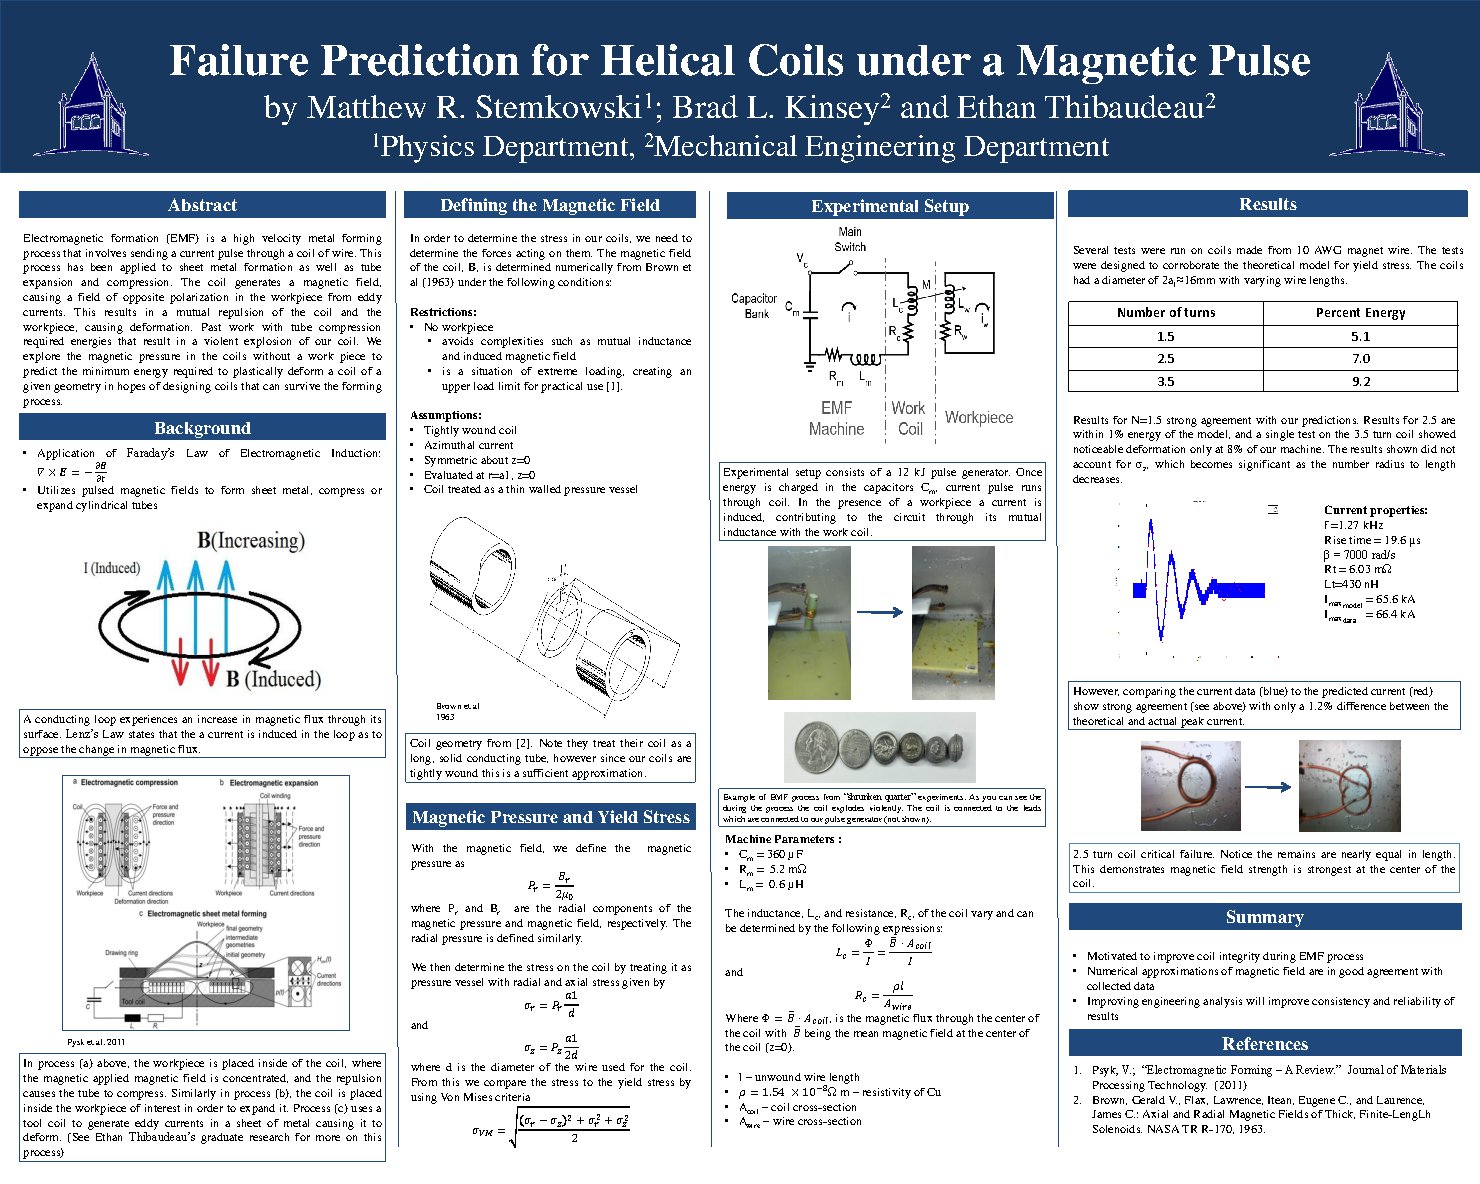 Failure Prediction For Helical Coils Under A Magnetic Pulse by mry483